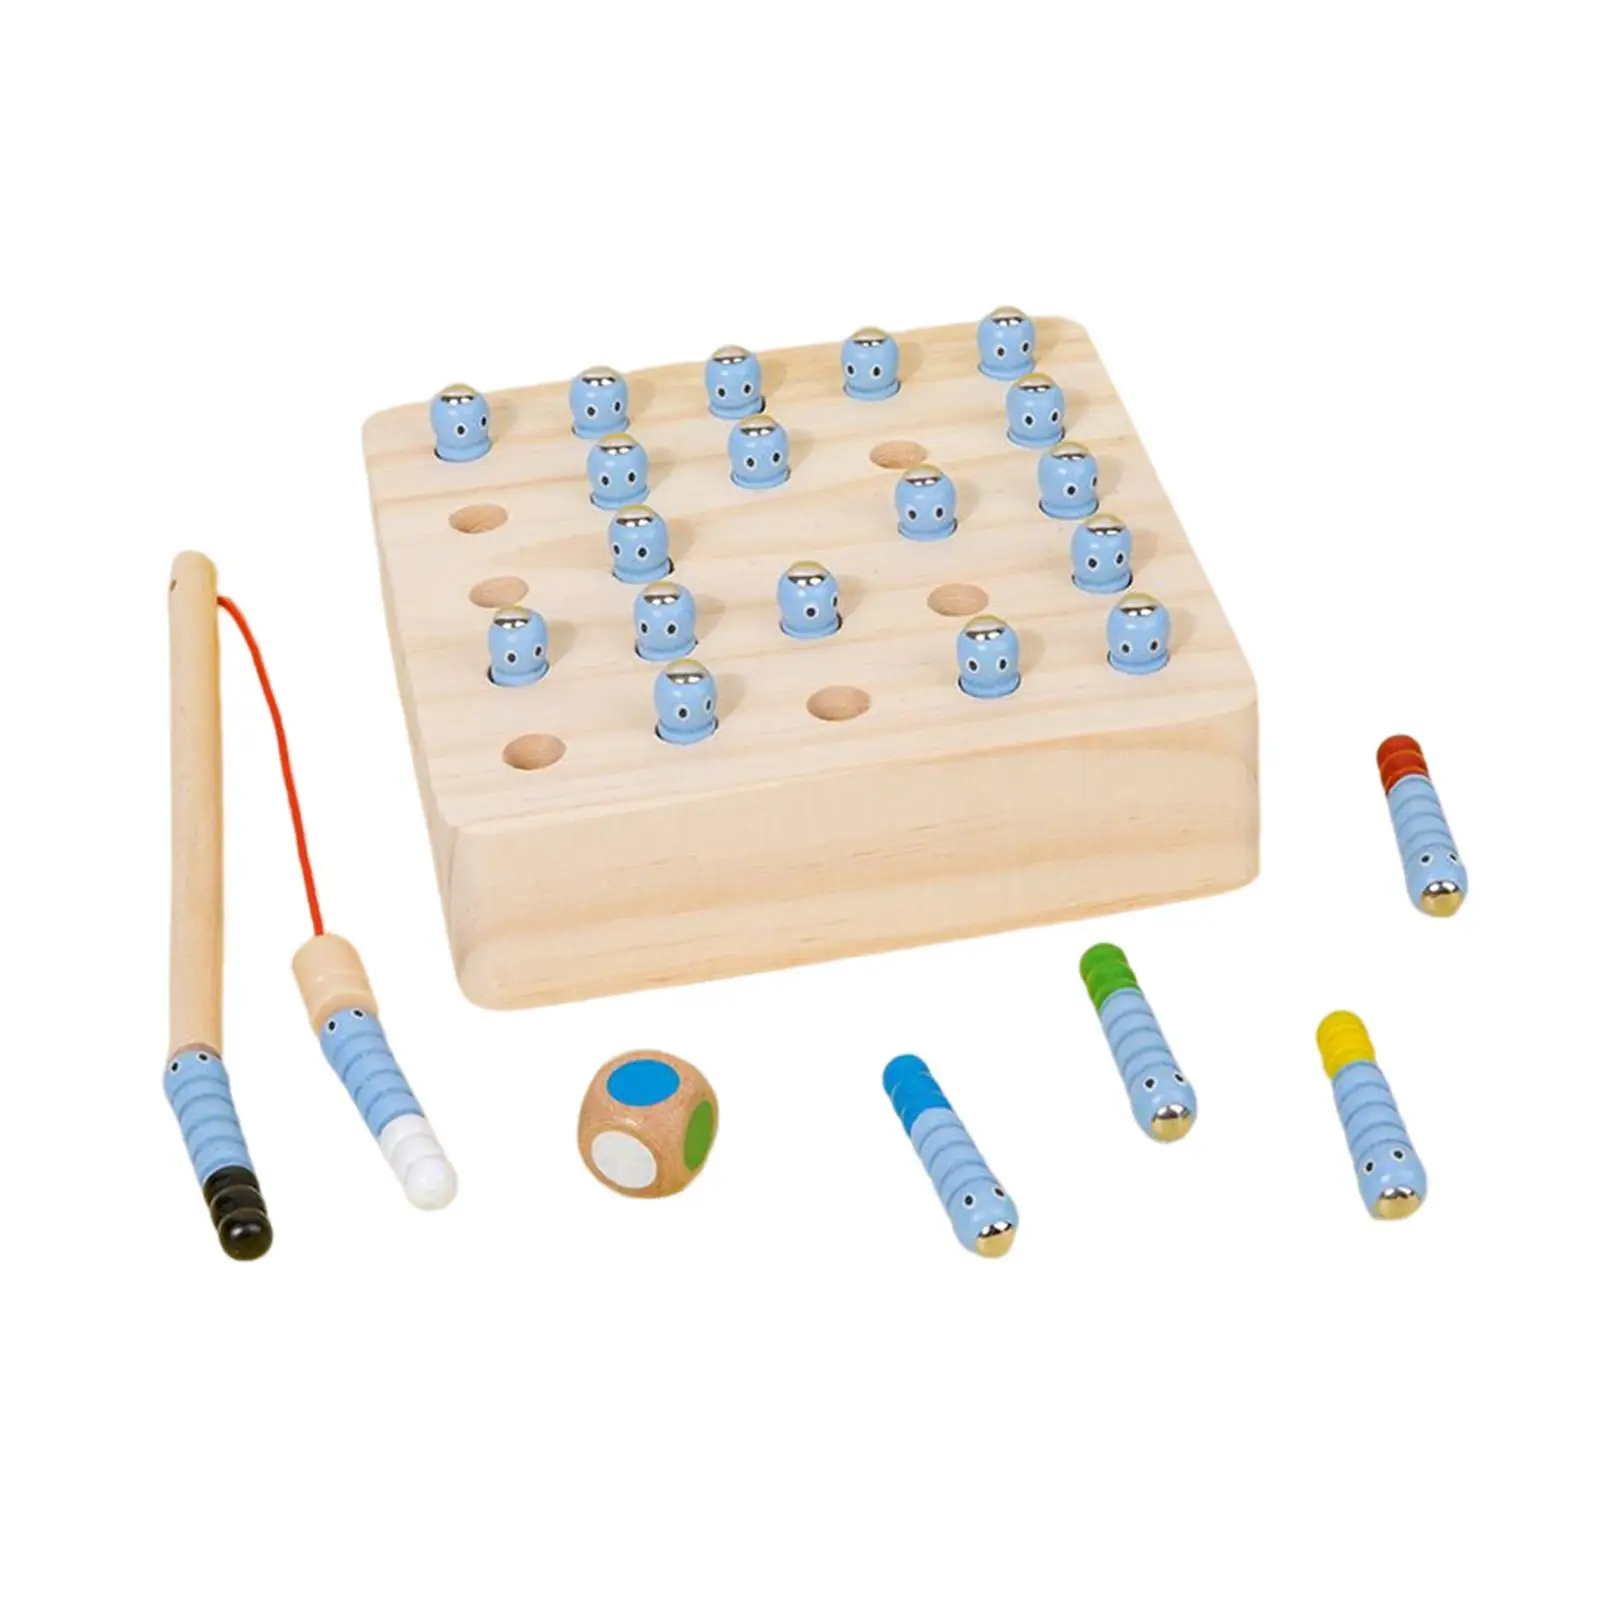 Wooden Fishing Game Toy Educational Toys Busy Board Board Game for Children